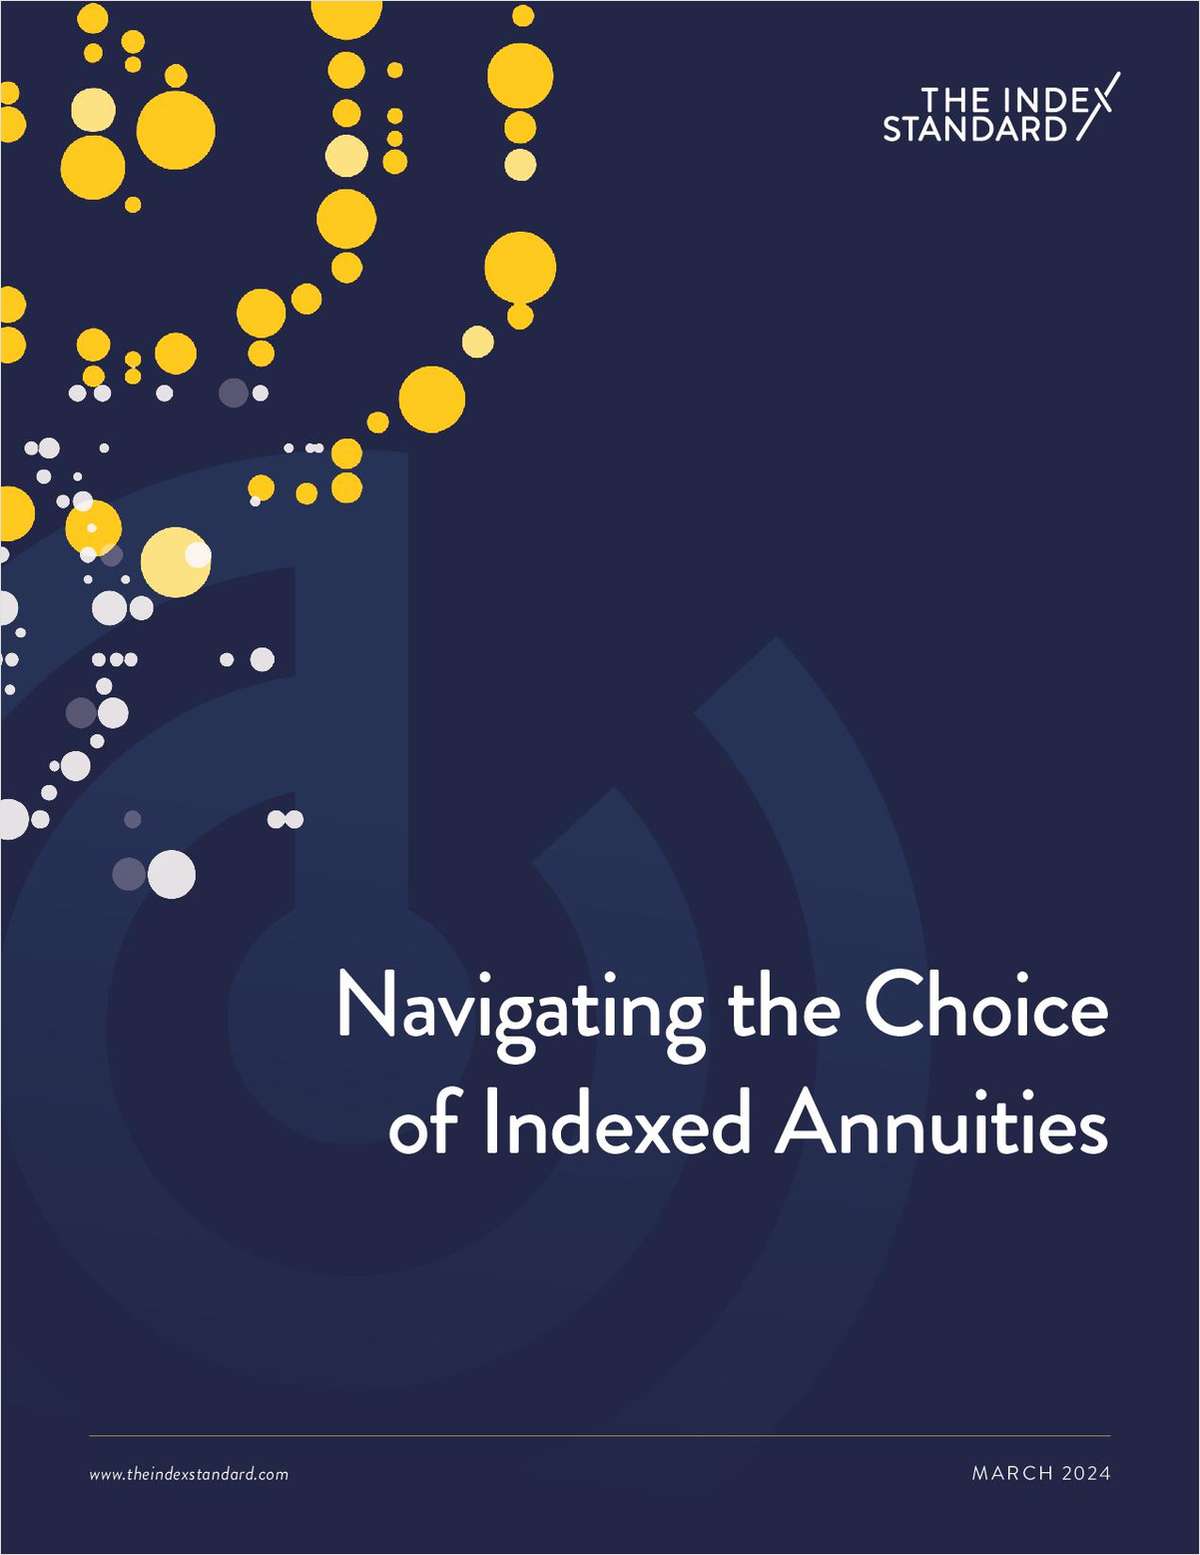 Navigating the Choice of Indexed Annuities